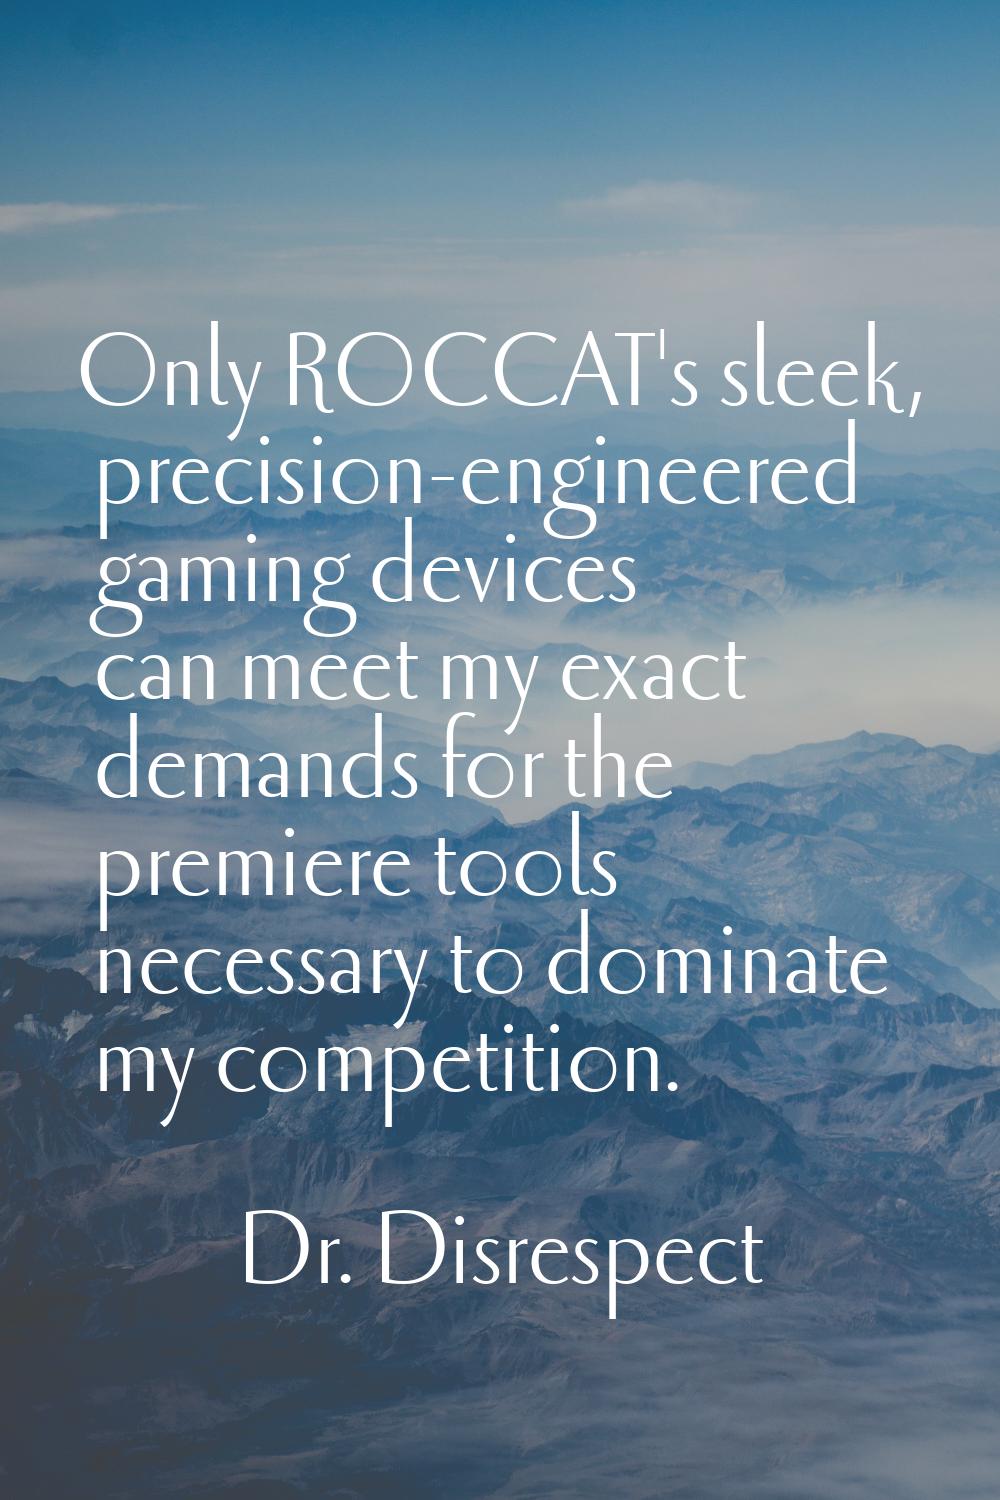 Only ROCCAT's sleek, precision-engineered gaming devices can meet my exact demands for the premiere